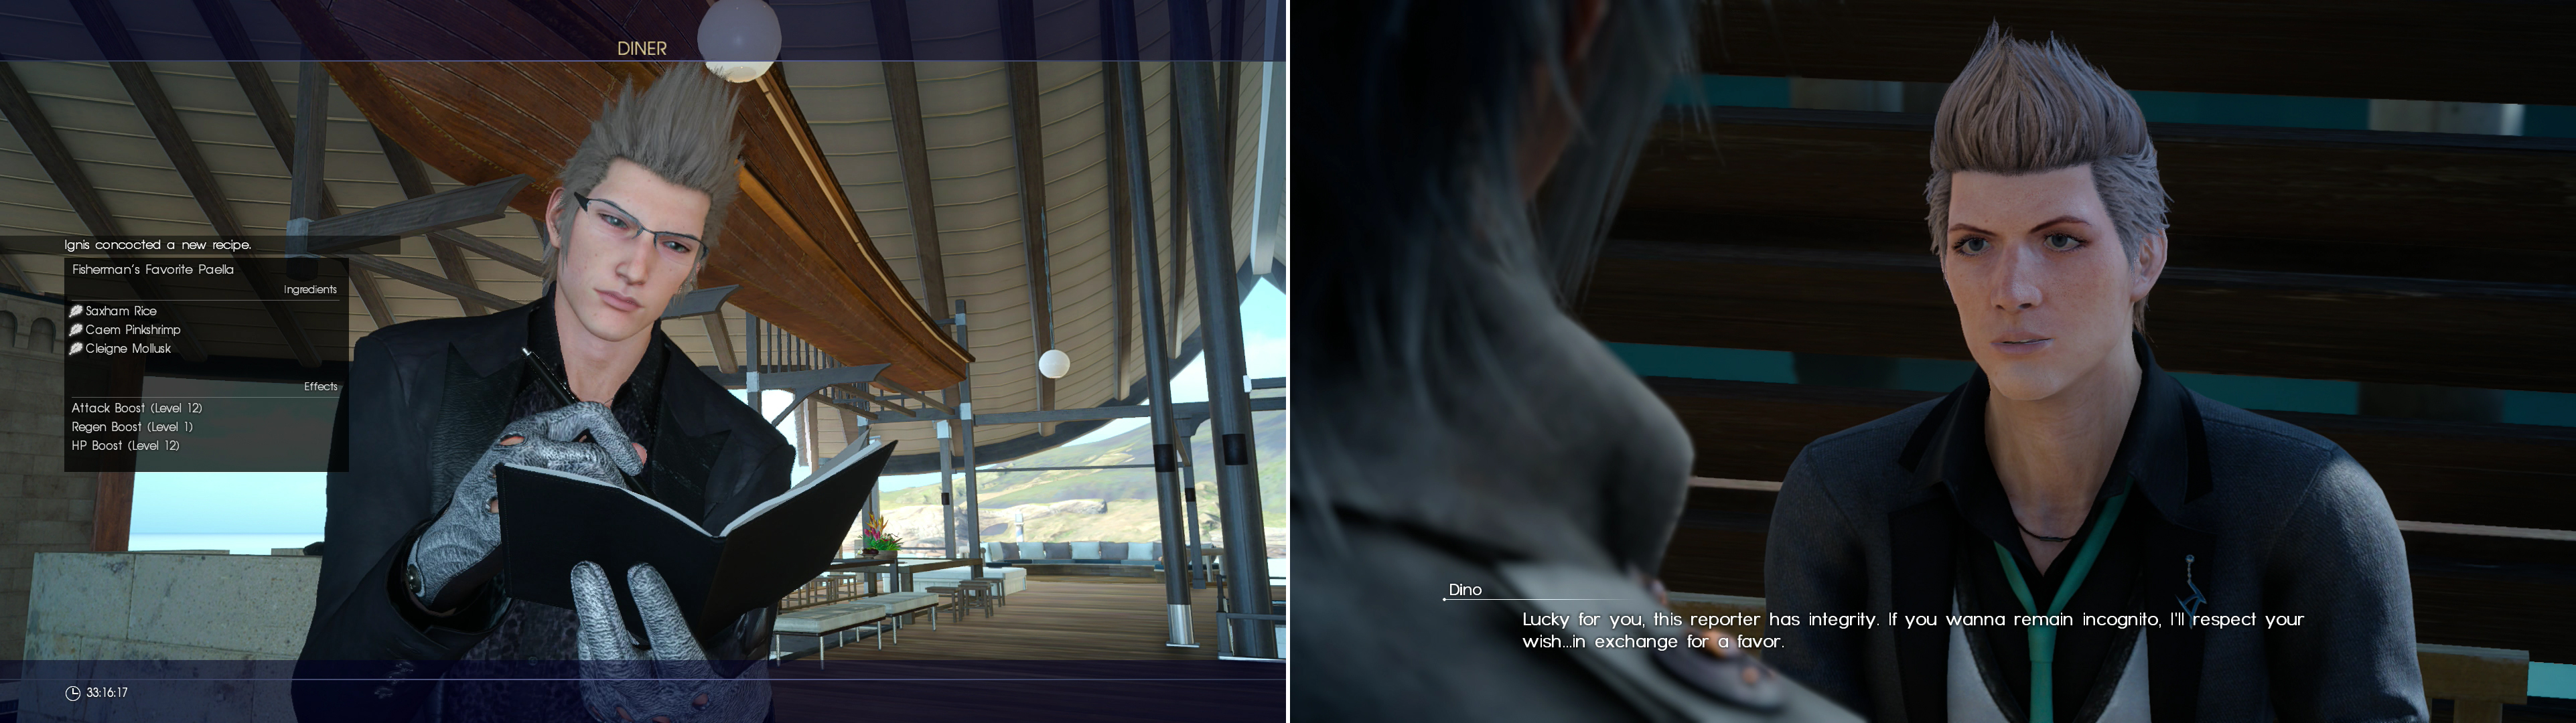 While expensive, Ignis can learn some new recipes if you treat yourselves to a meal at the Mother of Pearl (left). Dino will tell you bad news about the ferry - and offer you an alternative if you agree to some quid pro quo (right).